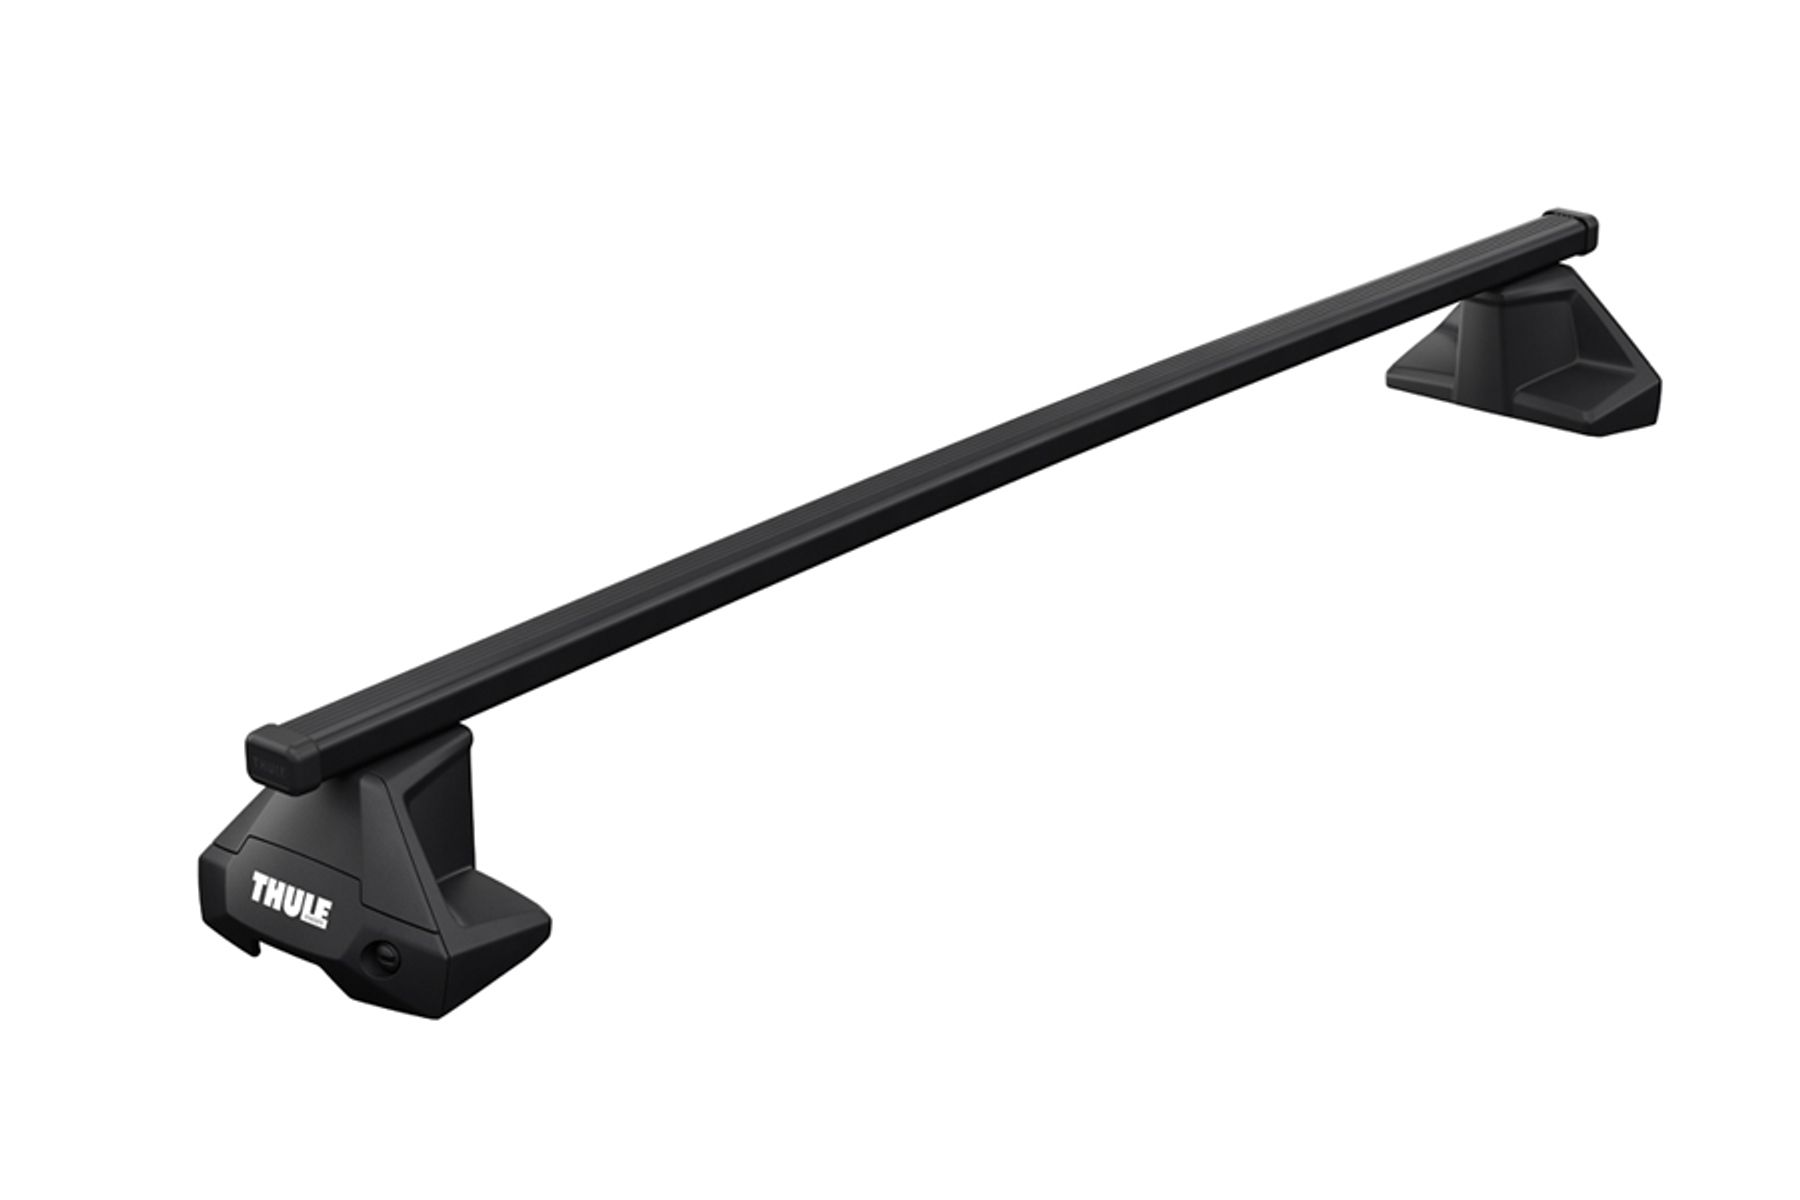 Thule 64 inch Square Bar Load Bar roof rack carrier crossbars LB65 